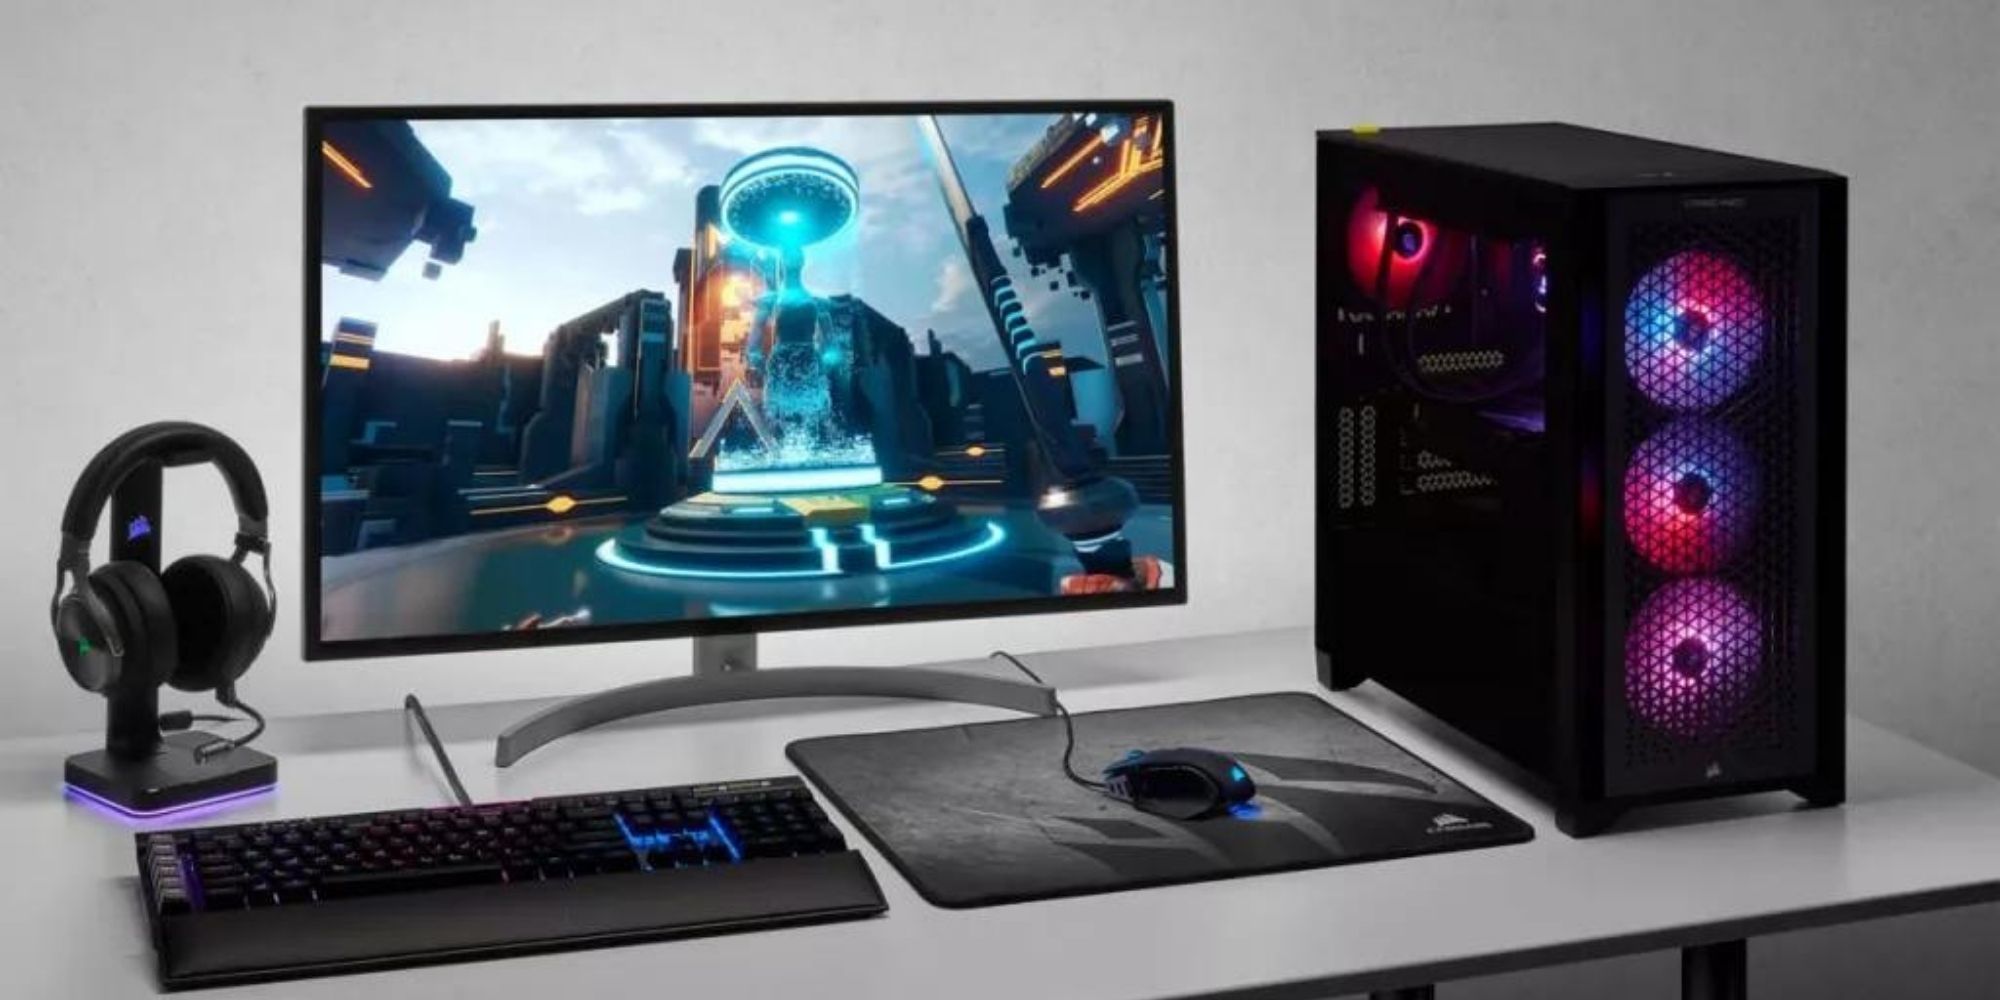 Official Promo image from Corsair of PC setup